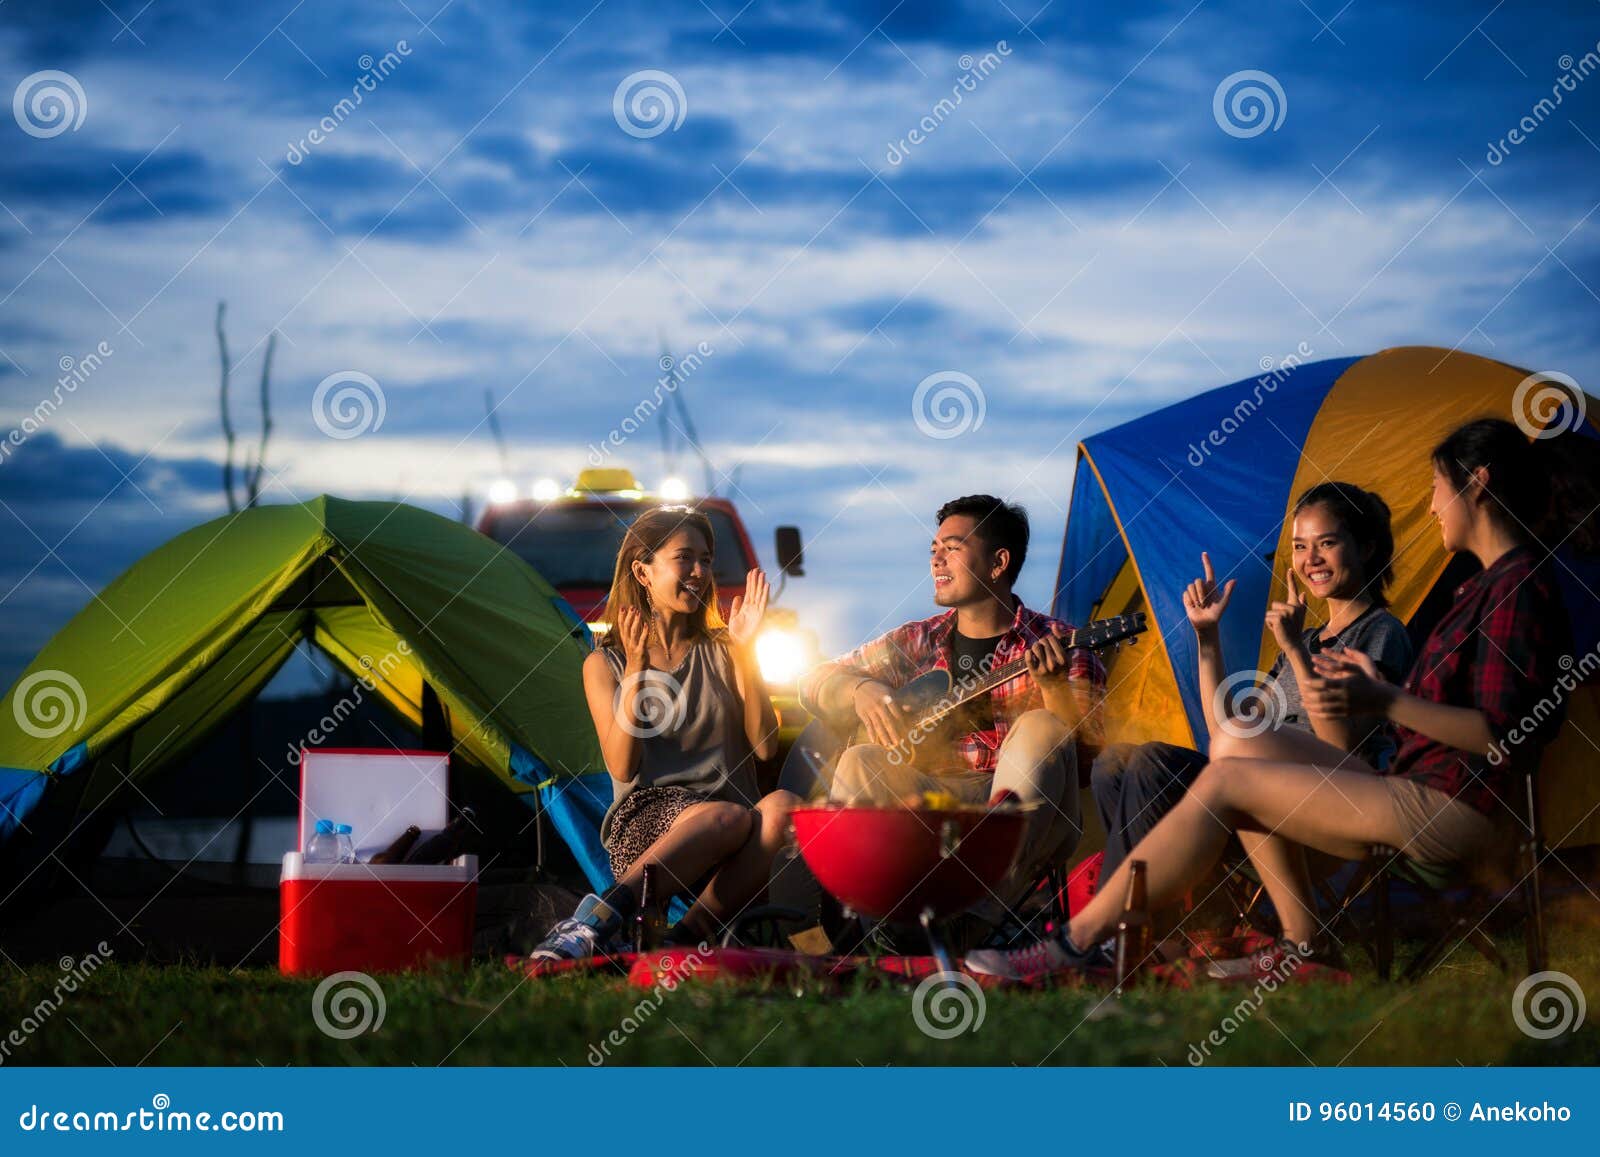 camping of asian man and women group